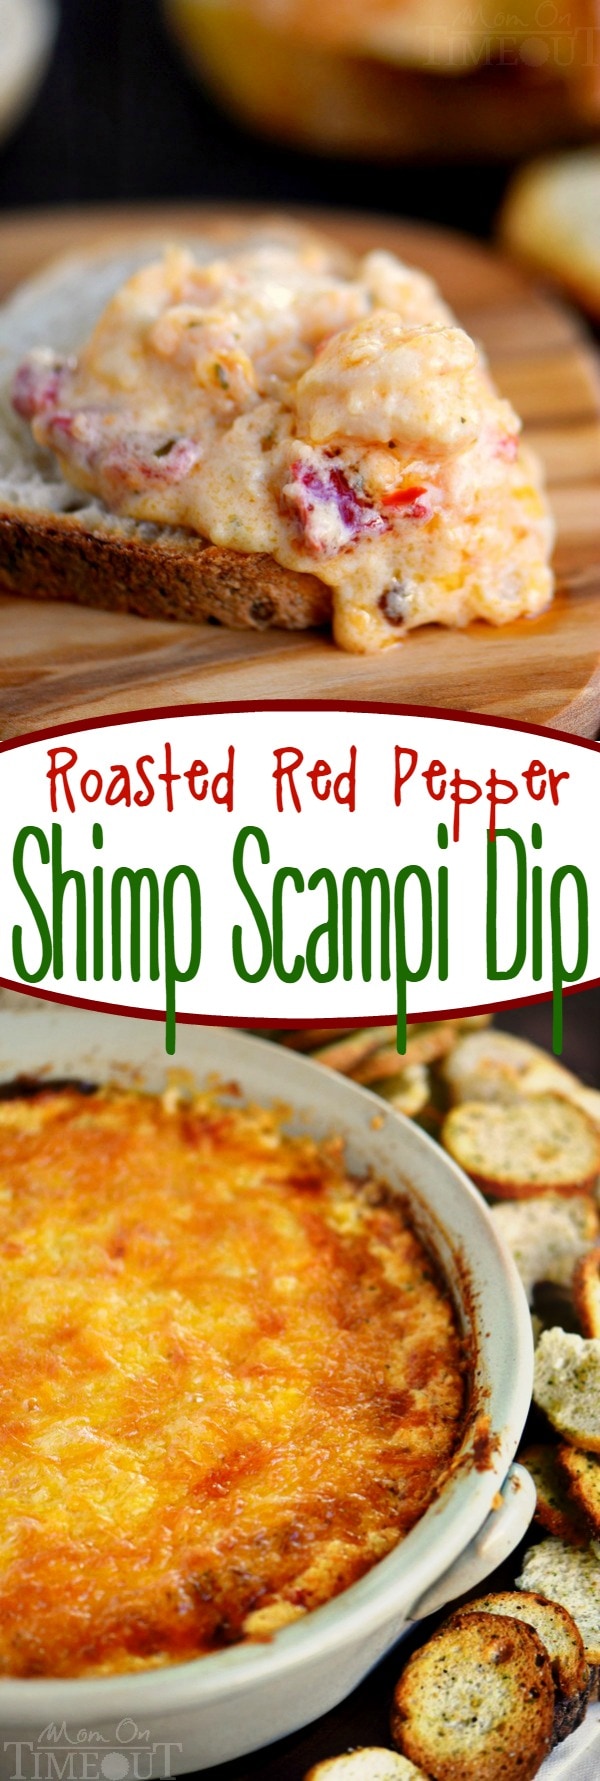 This Roasted Red Pepper Shrimp Scampi Dip is the perfect addition to your game day menu! Garlic, cheese, and roasted red peppers make for a creamy and rich appetizer nobody can resist!